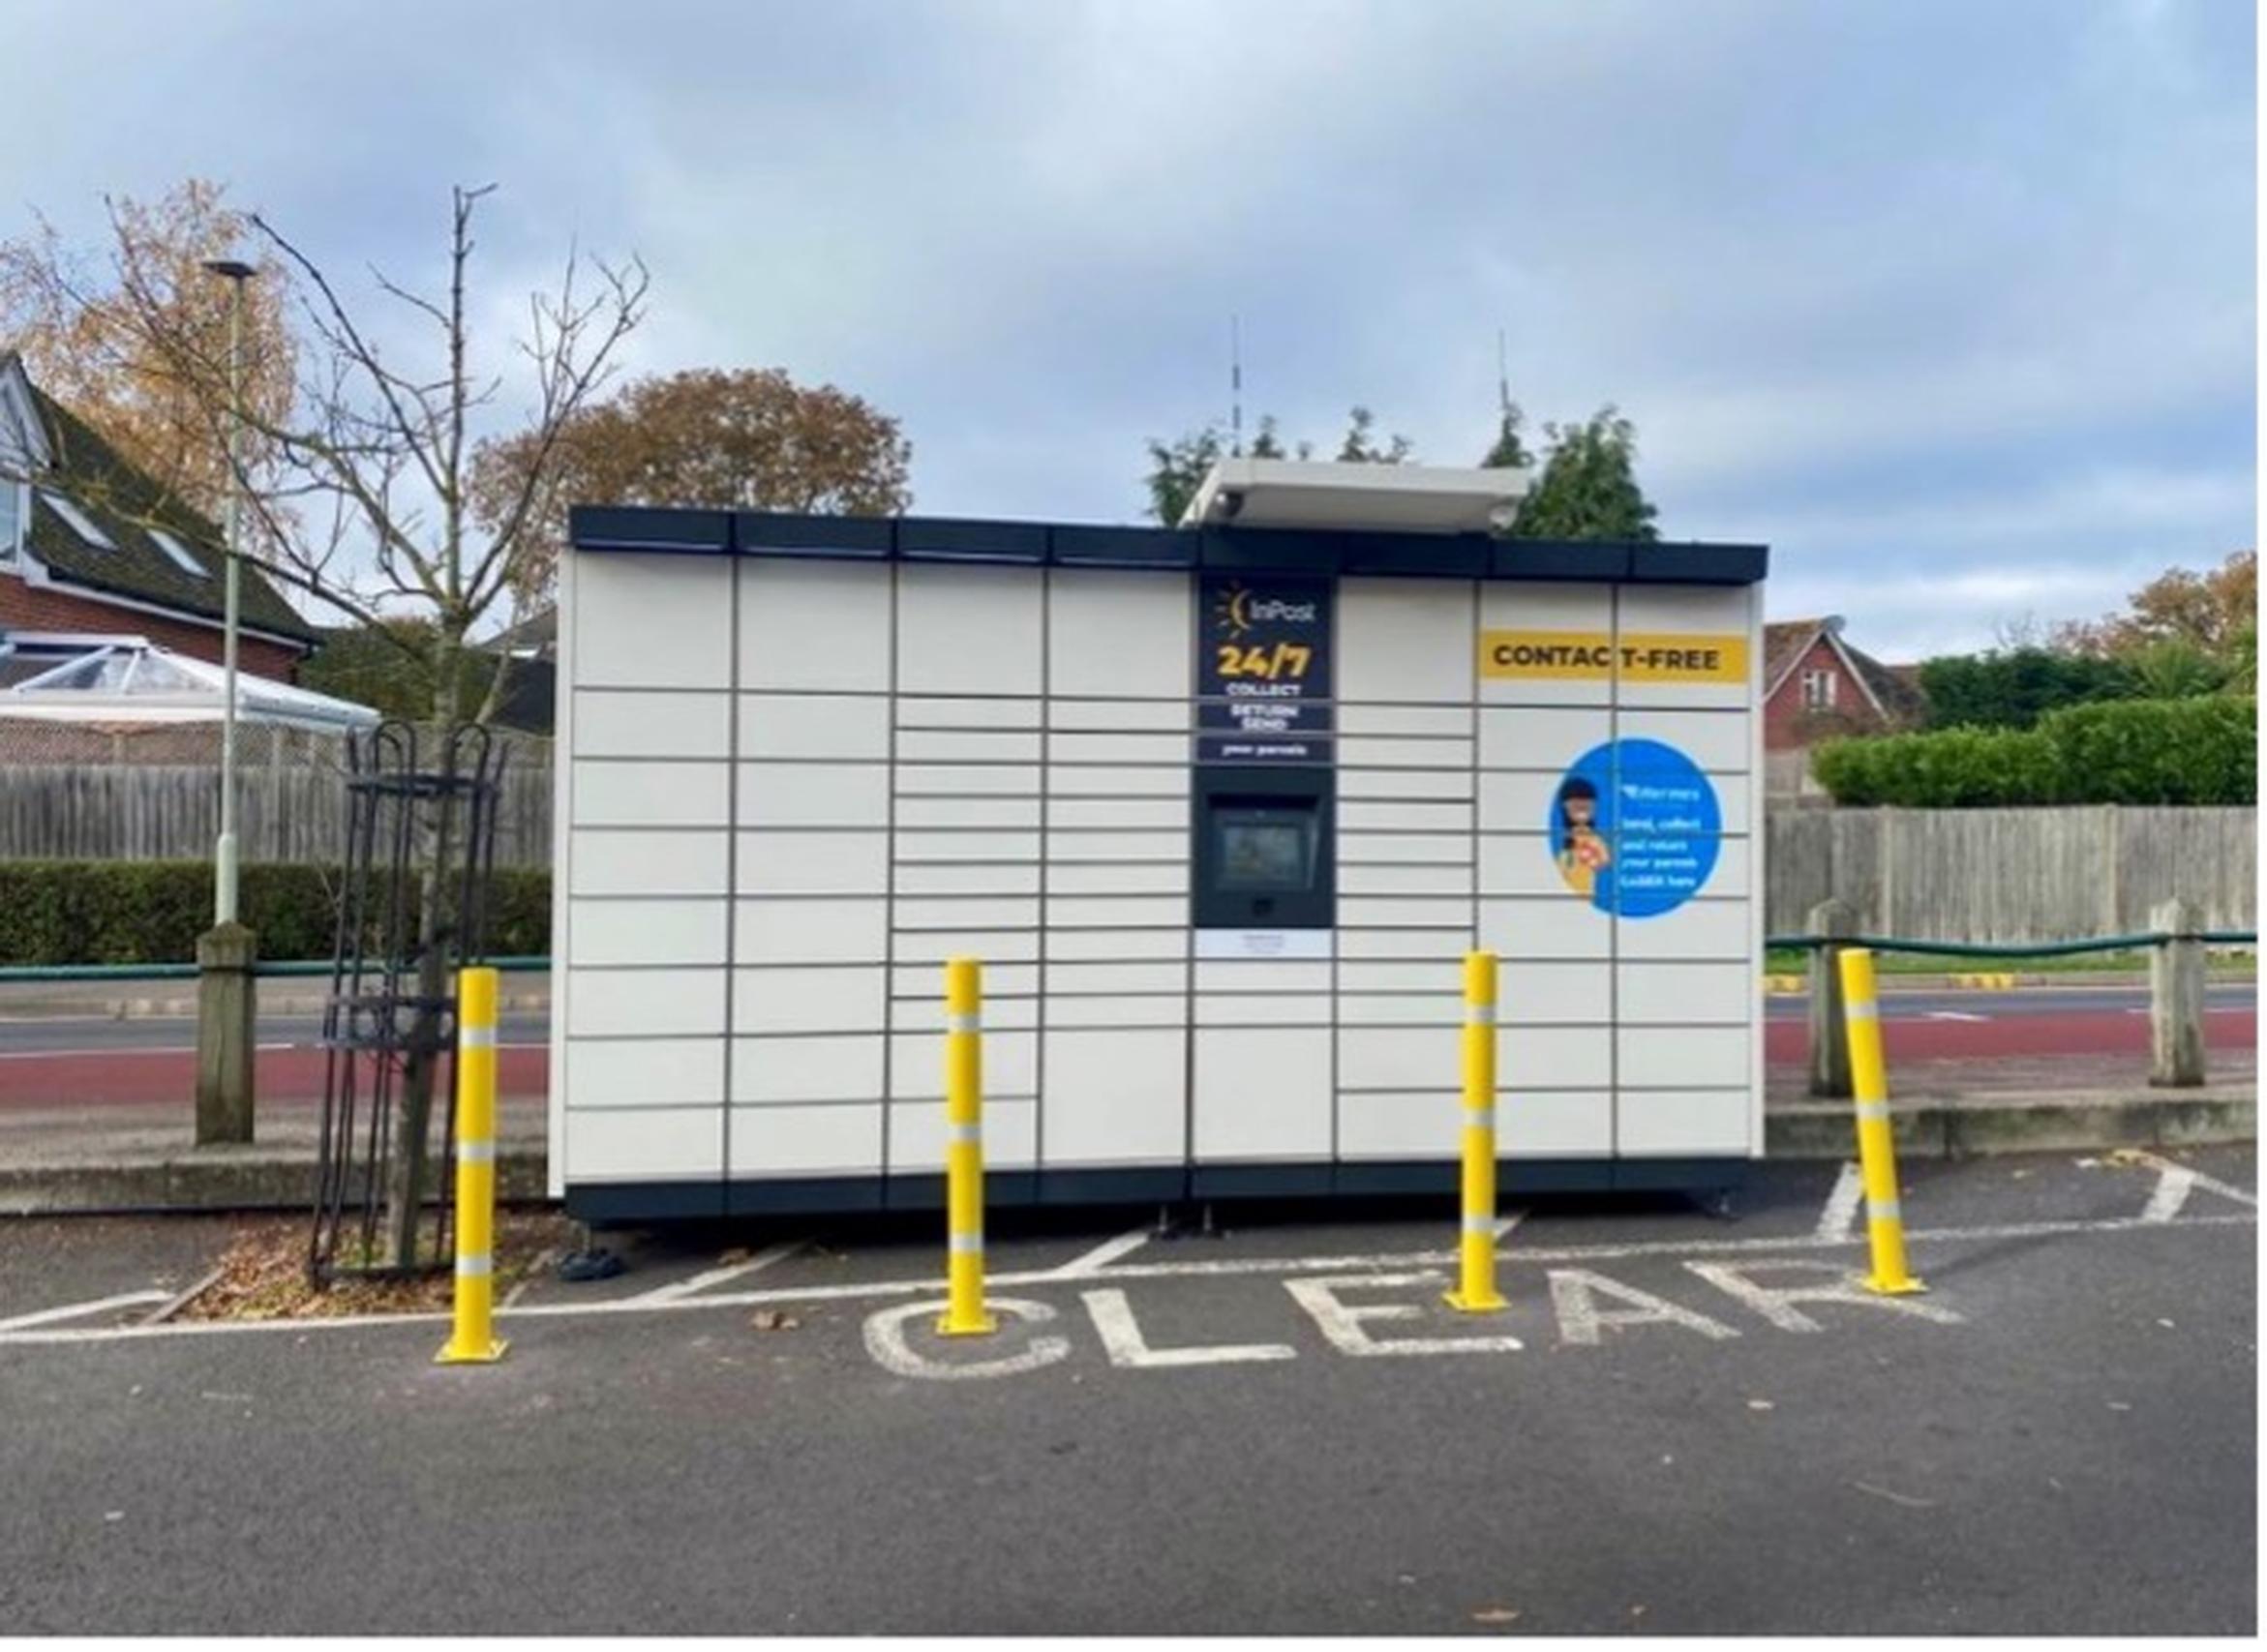 Wokingham offers click & collect lockers in car parks